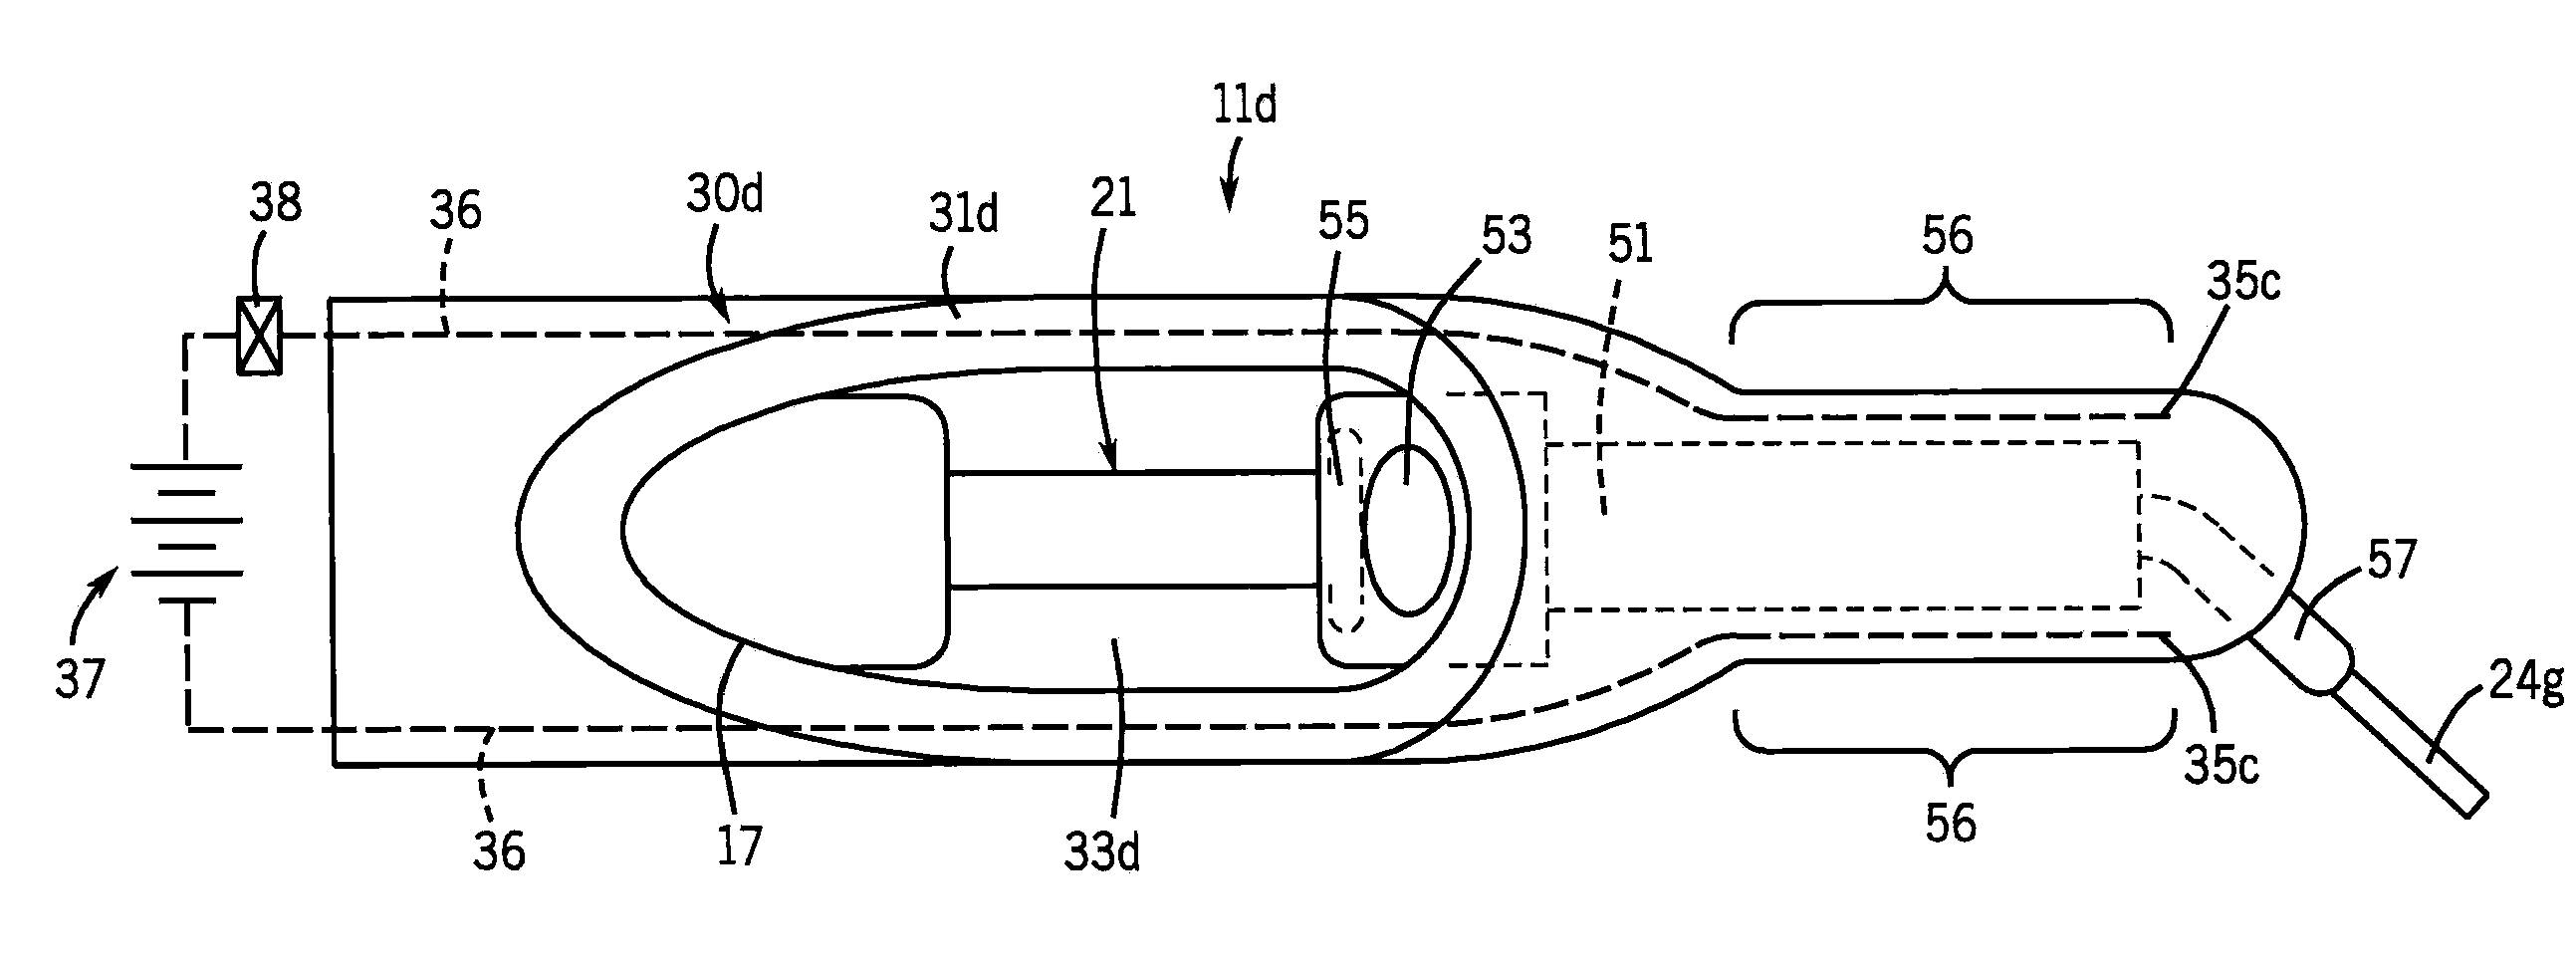 Dental Matrix Devices Specific To Anterior Teeth, and Injection Molded Filling Techniques and Devices